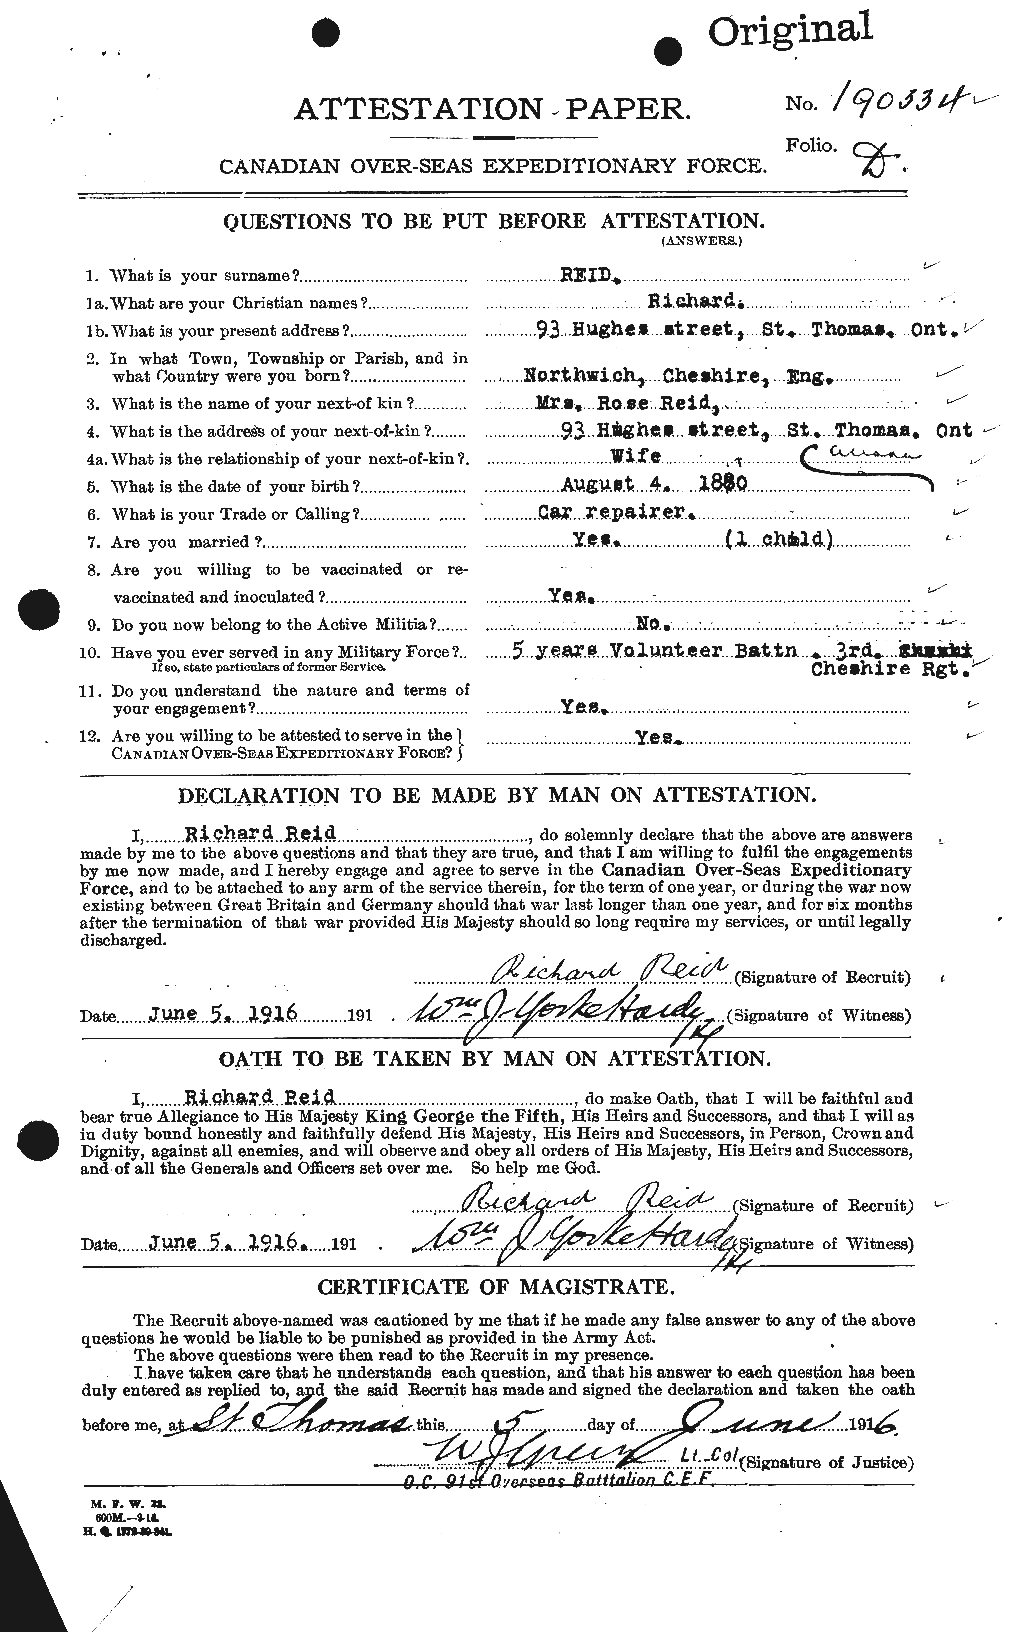 Personnel Records of the First World War - CEF 601859a